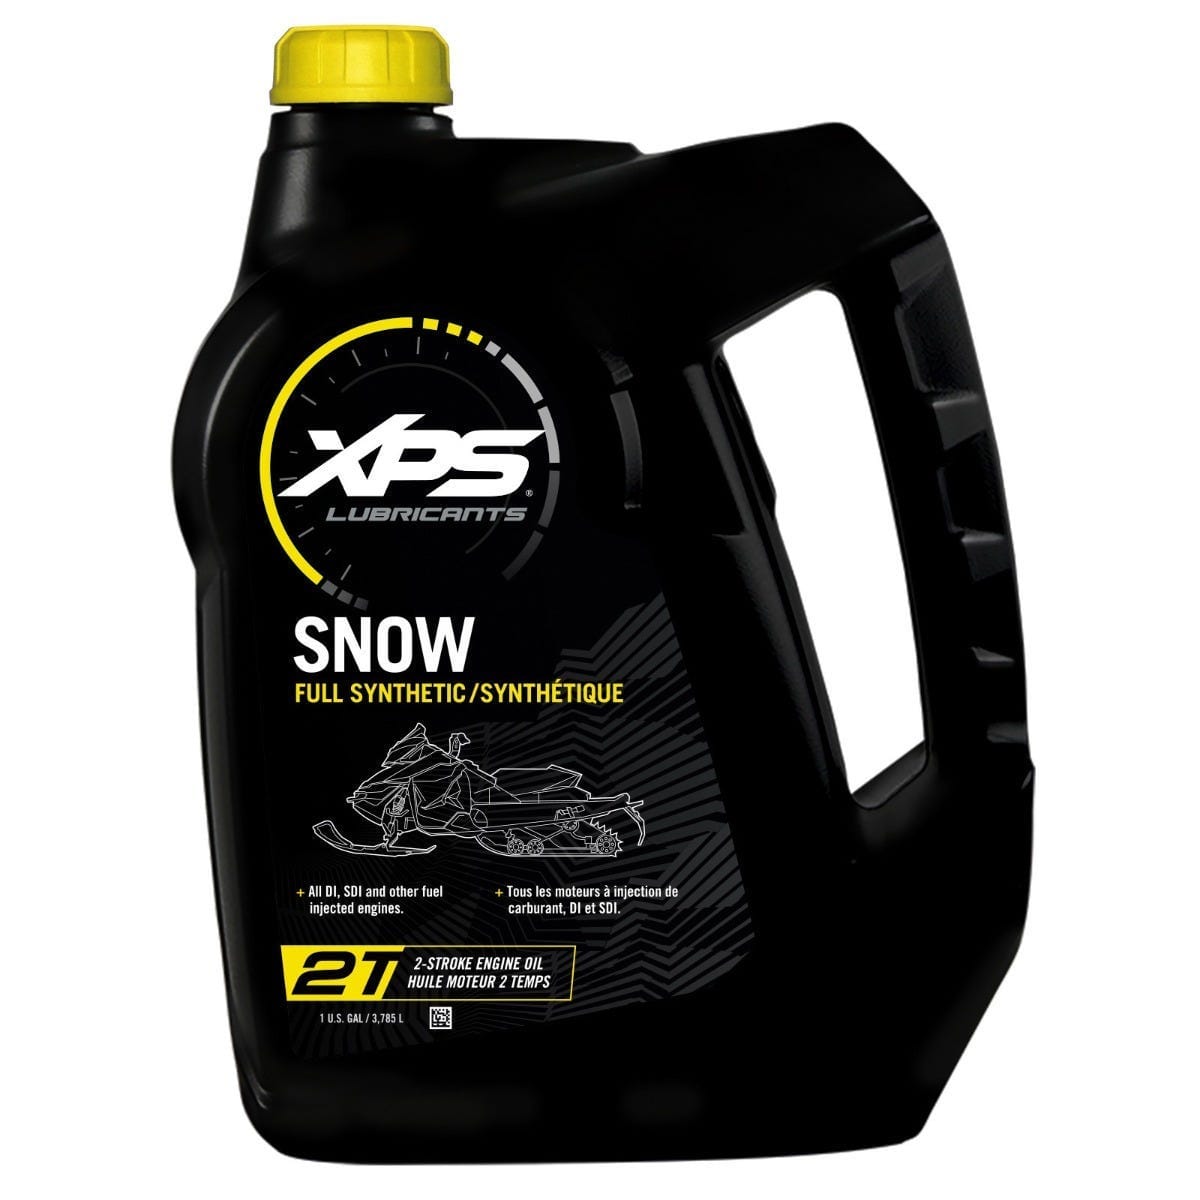 2T Snowmobile Synthetic Oil / 1 US gal.